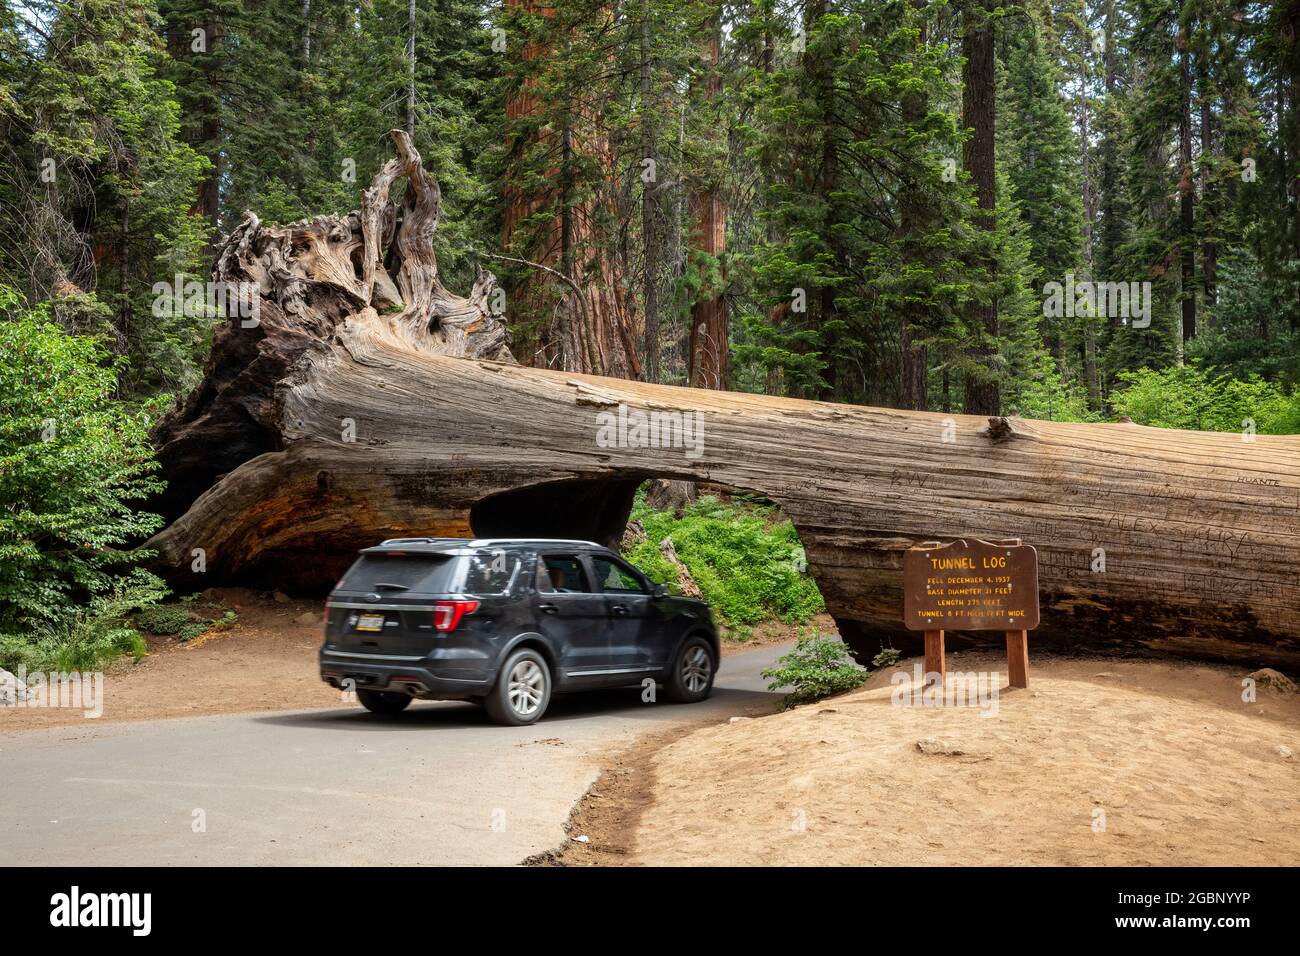 Tunnel Log is a 17 foot wide by 8 foot tall tunnel in a fallen sequoia in the Giant Forest on Crescent Meadow Road, Sequoia National Park, California Stock Photo